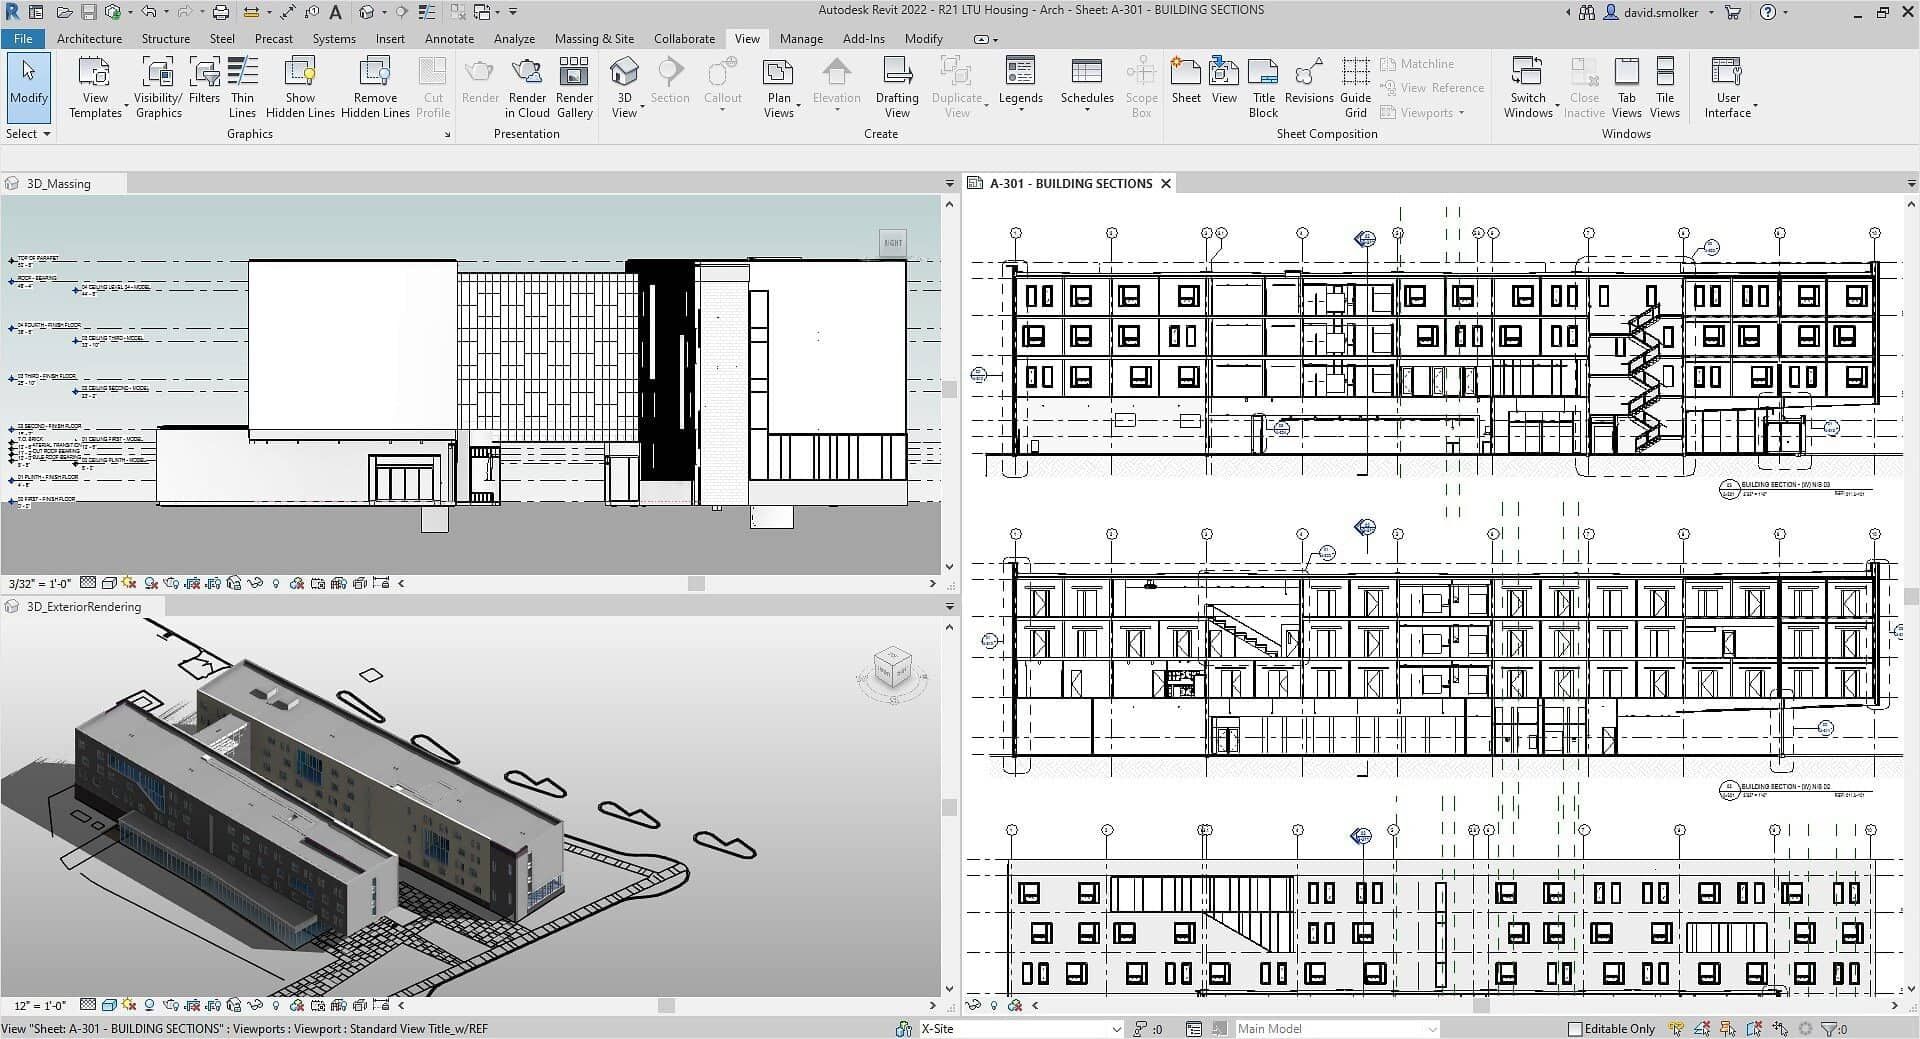 A 3D model and 2D drawings generated from it in Autodesk Revit